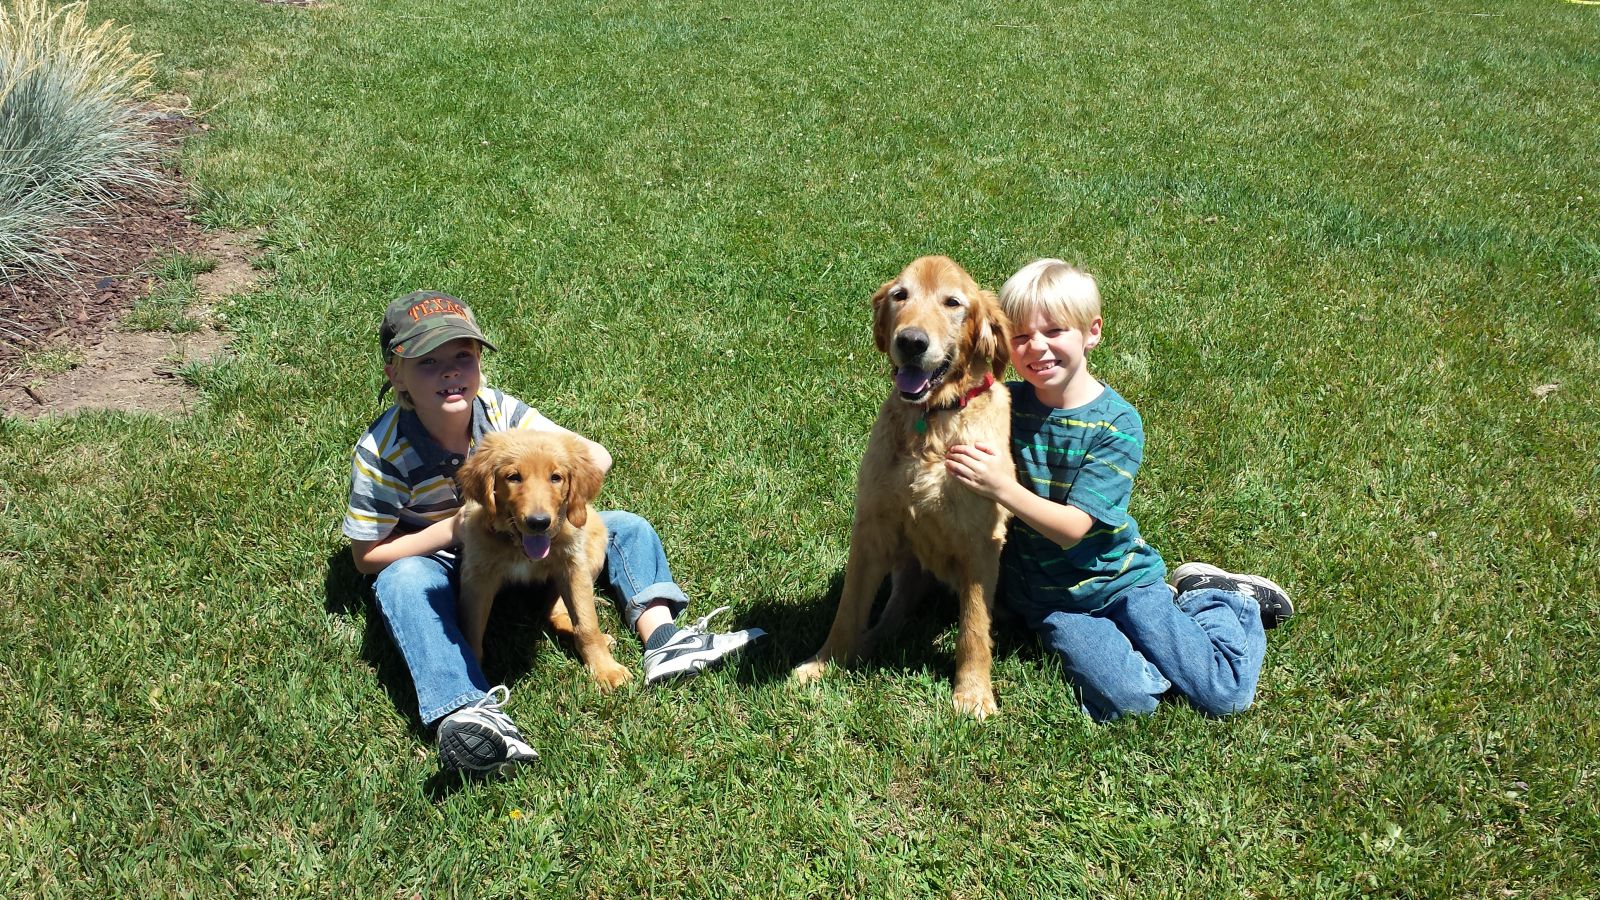 Grandsons with their dogs. What would we do without our dogs?